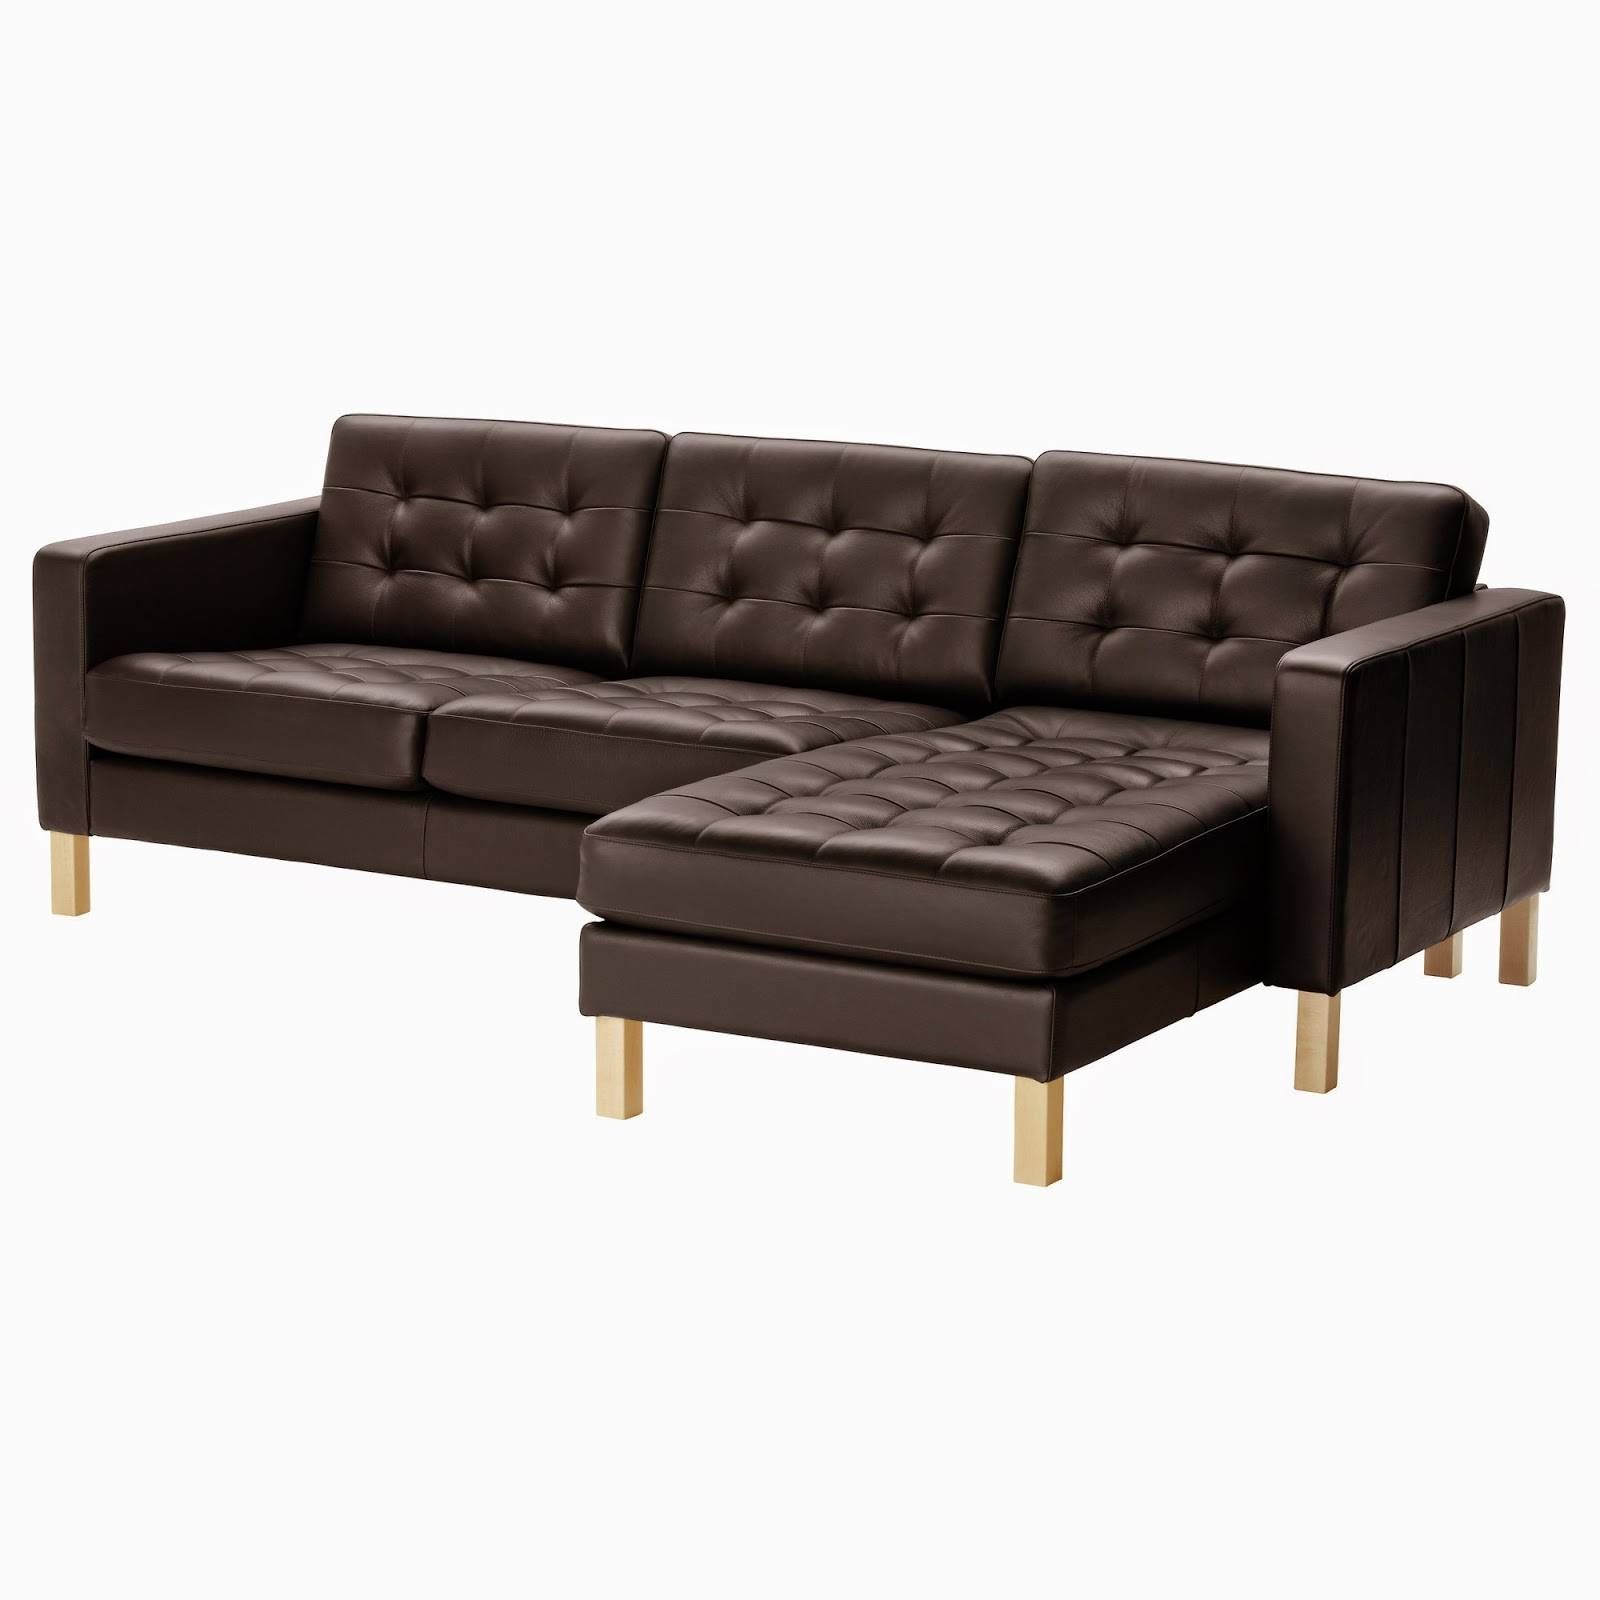 Furniture: Brown Leather Sectional Couchescraigslist Missoula Pertaining To Craigslist Leather Sofa (View 8 of 30)